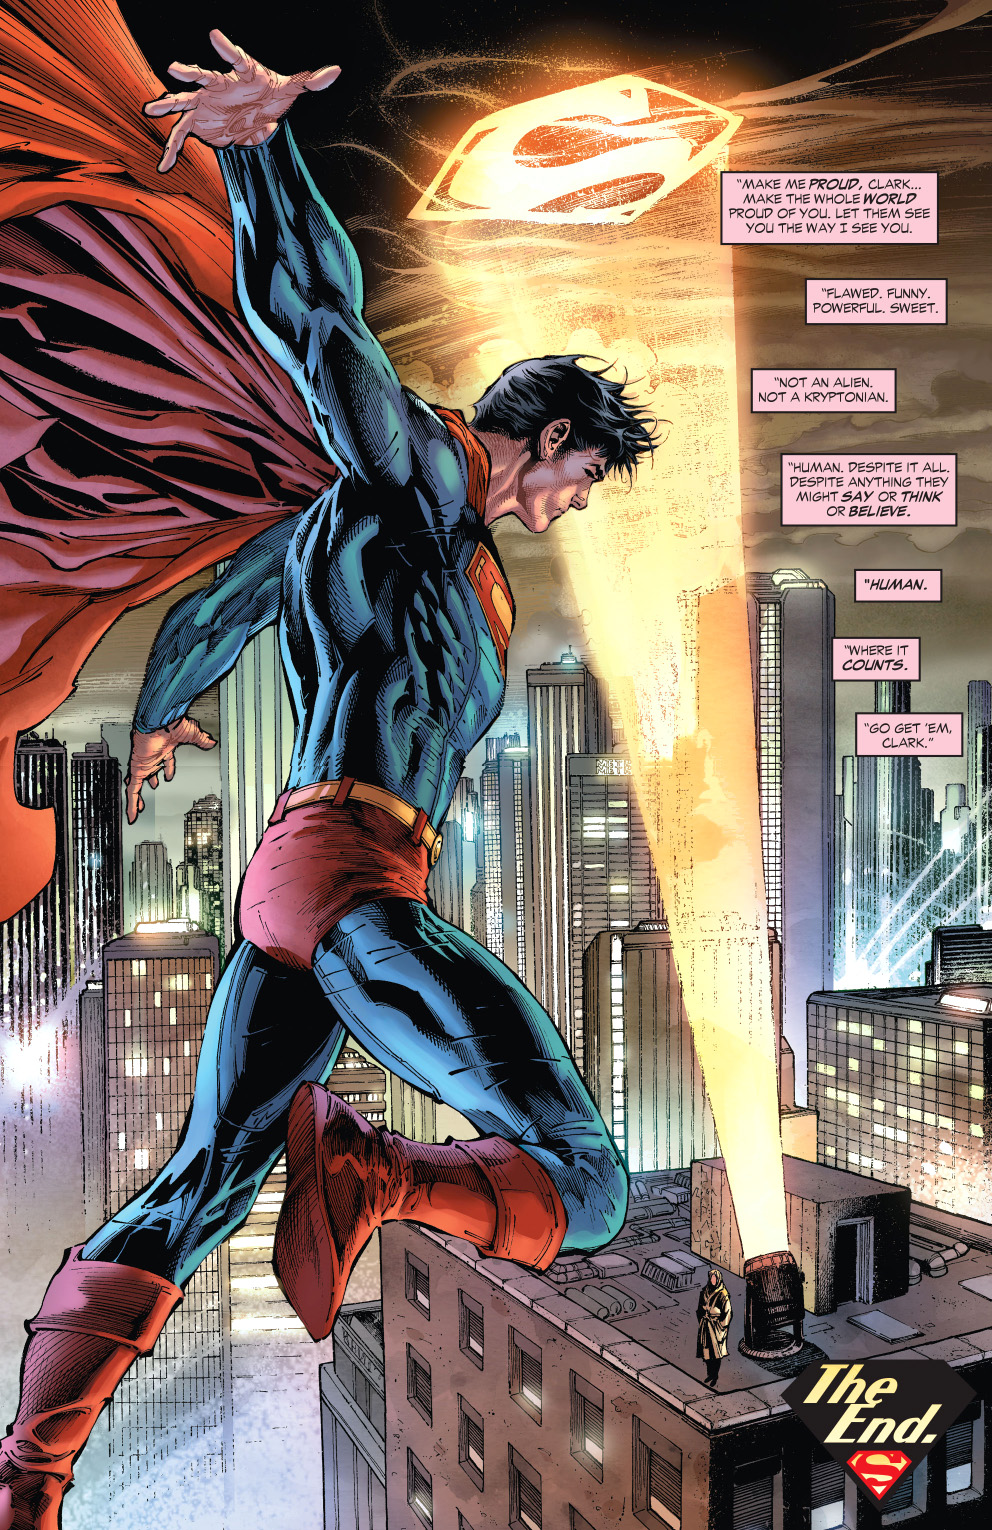 Lois Lane Summons Superman With The Superman Signal